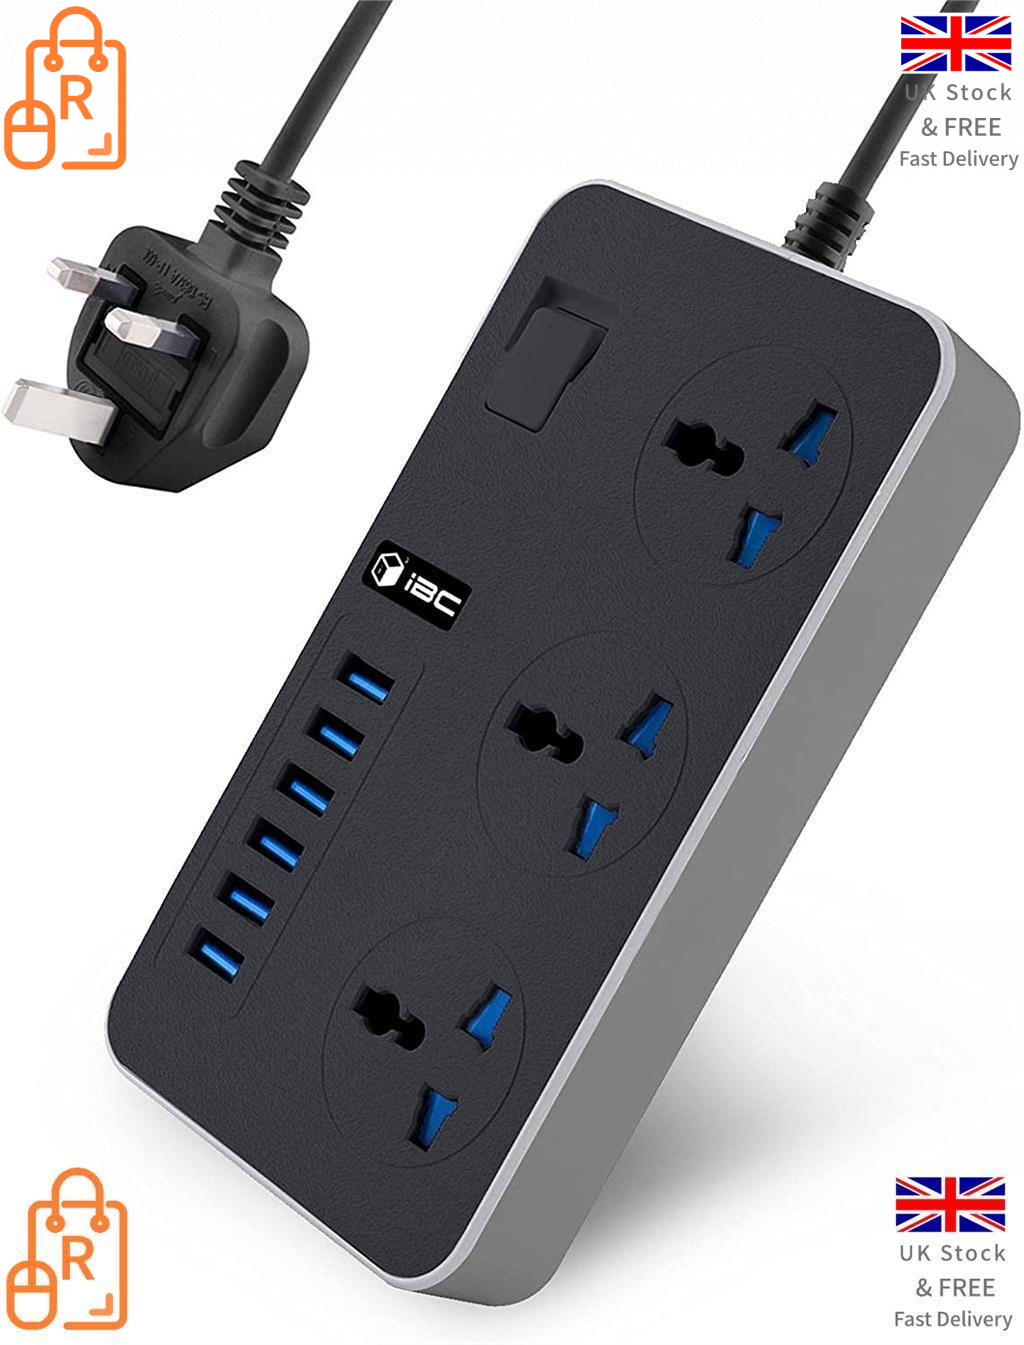 Extension Lead with 6 USB Cable Electric Plug Socket UK Mains Power 3 Gang Way - RLO Tech